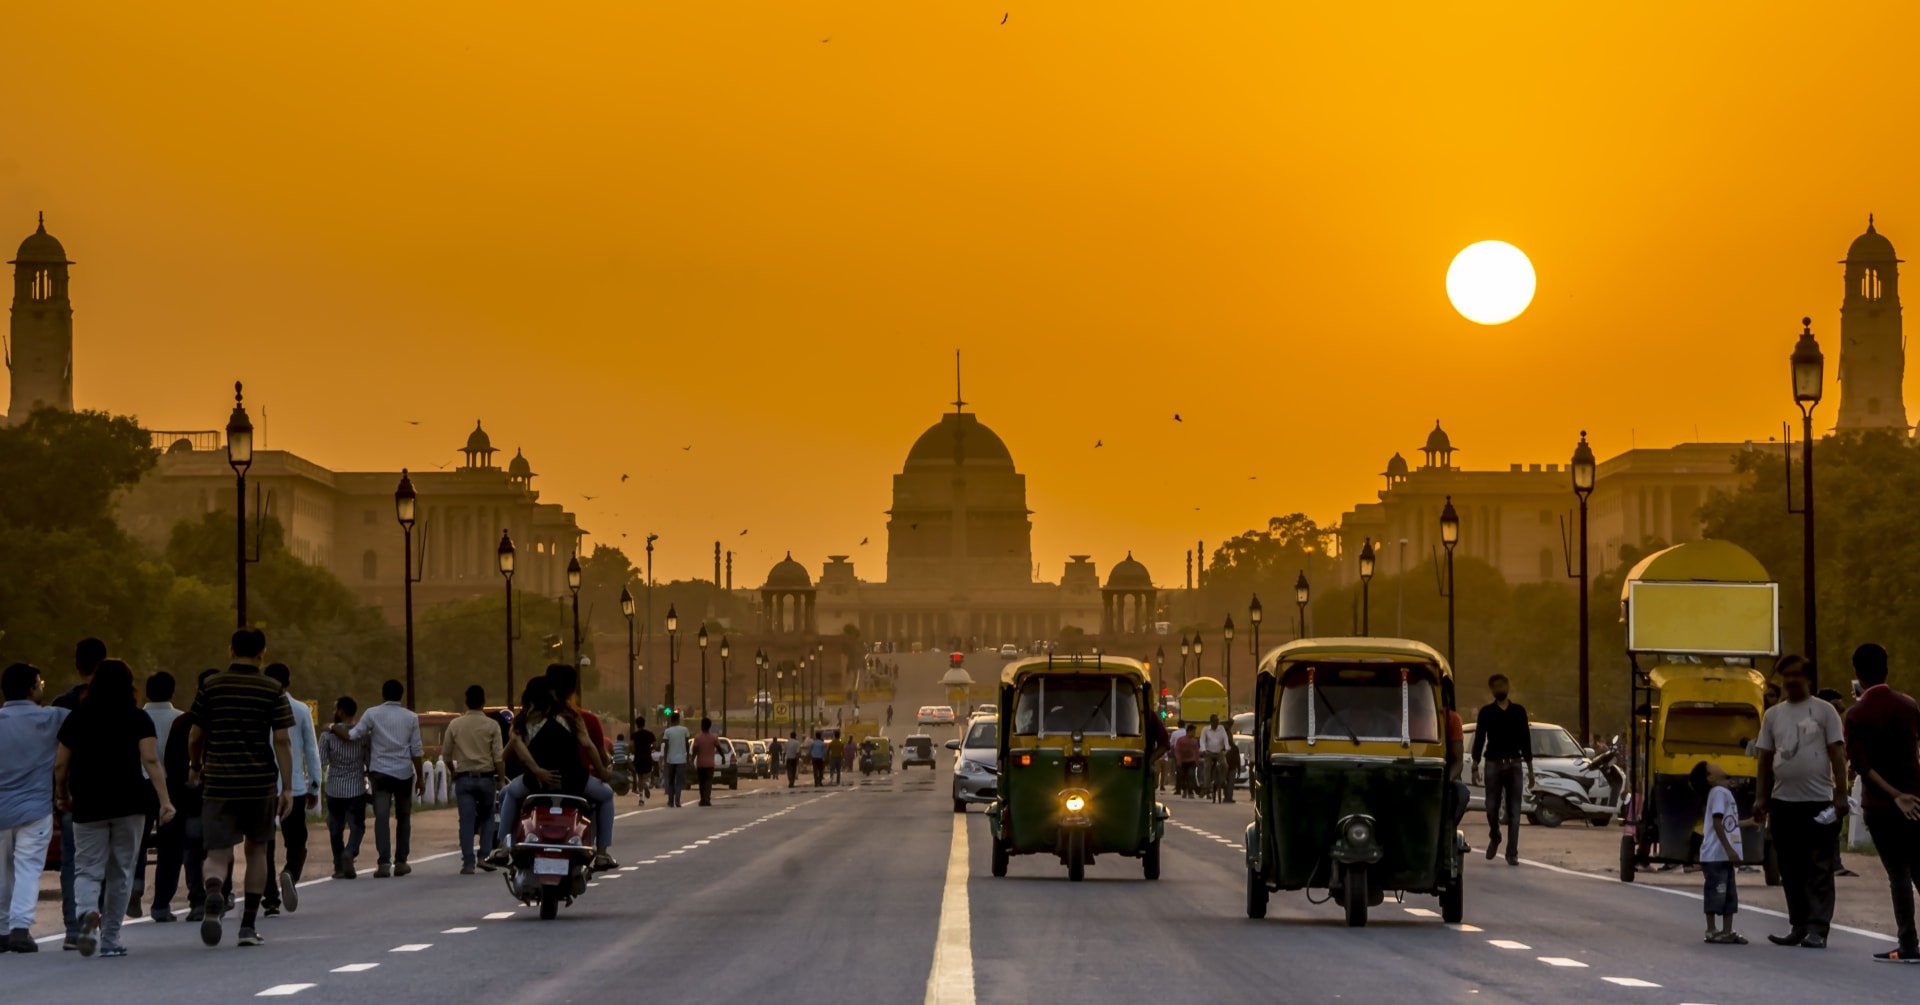 Our Top Reasons for Visiting India